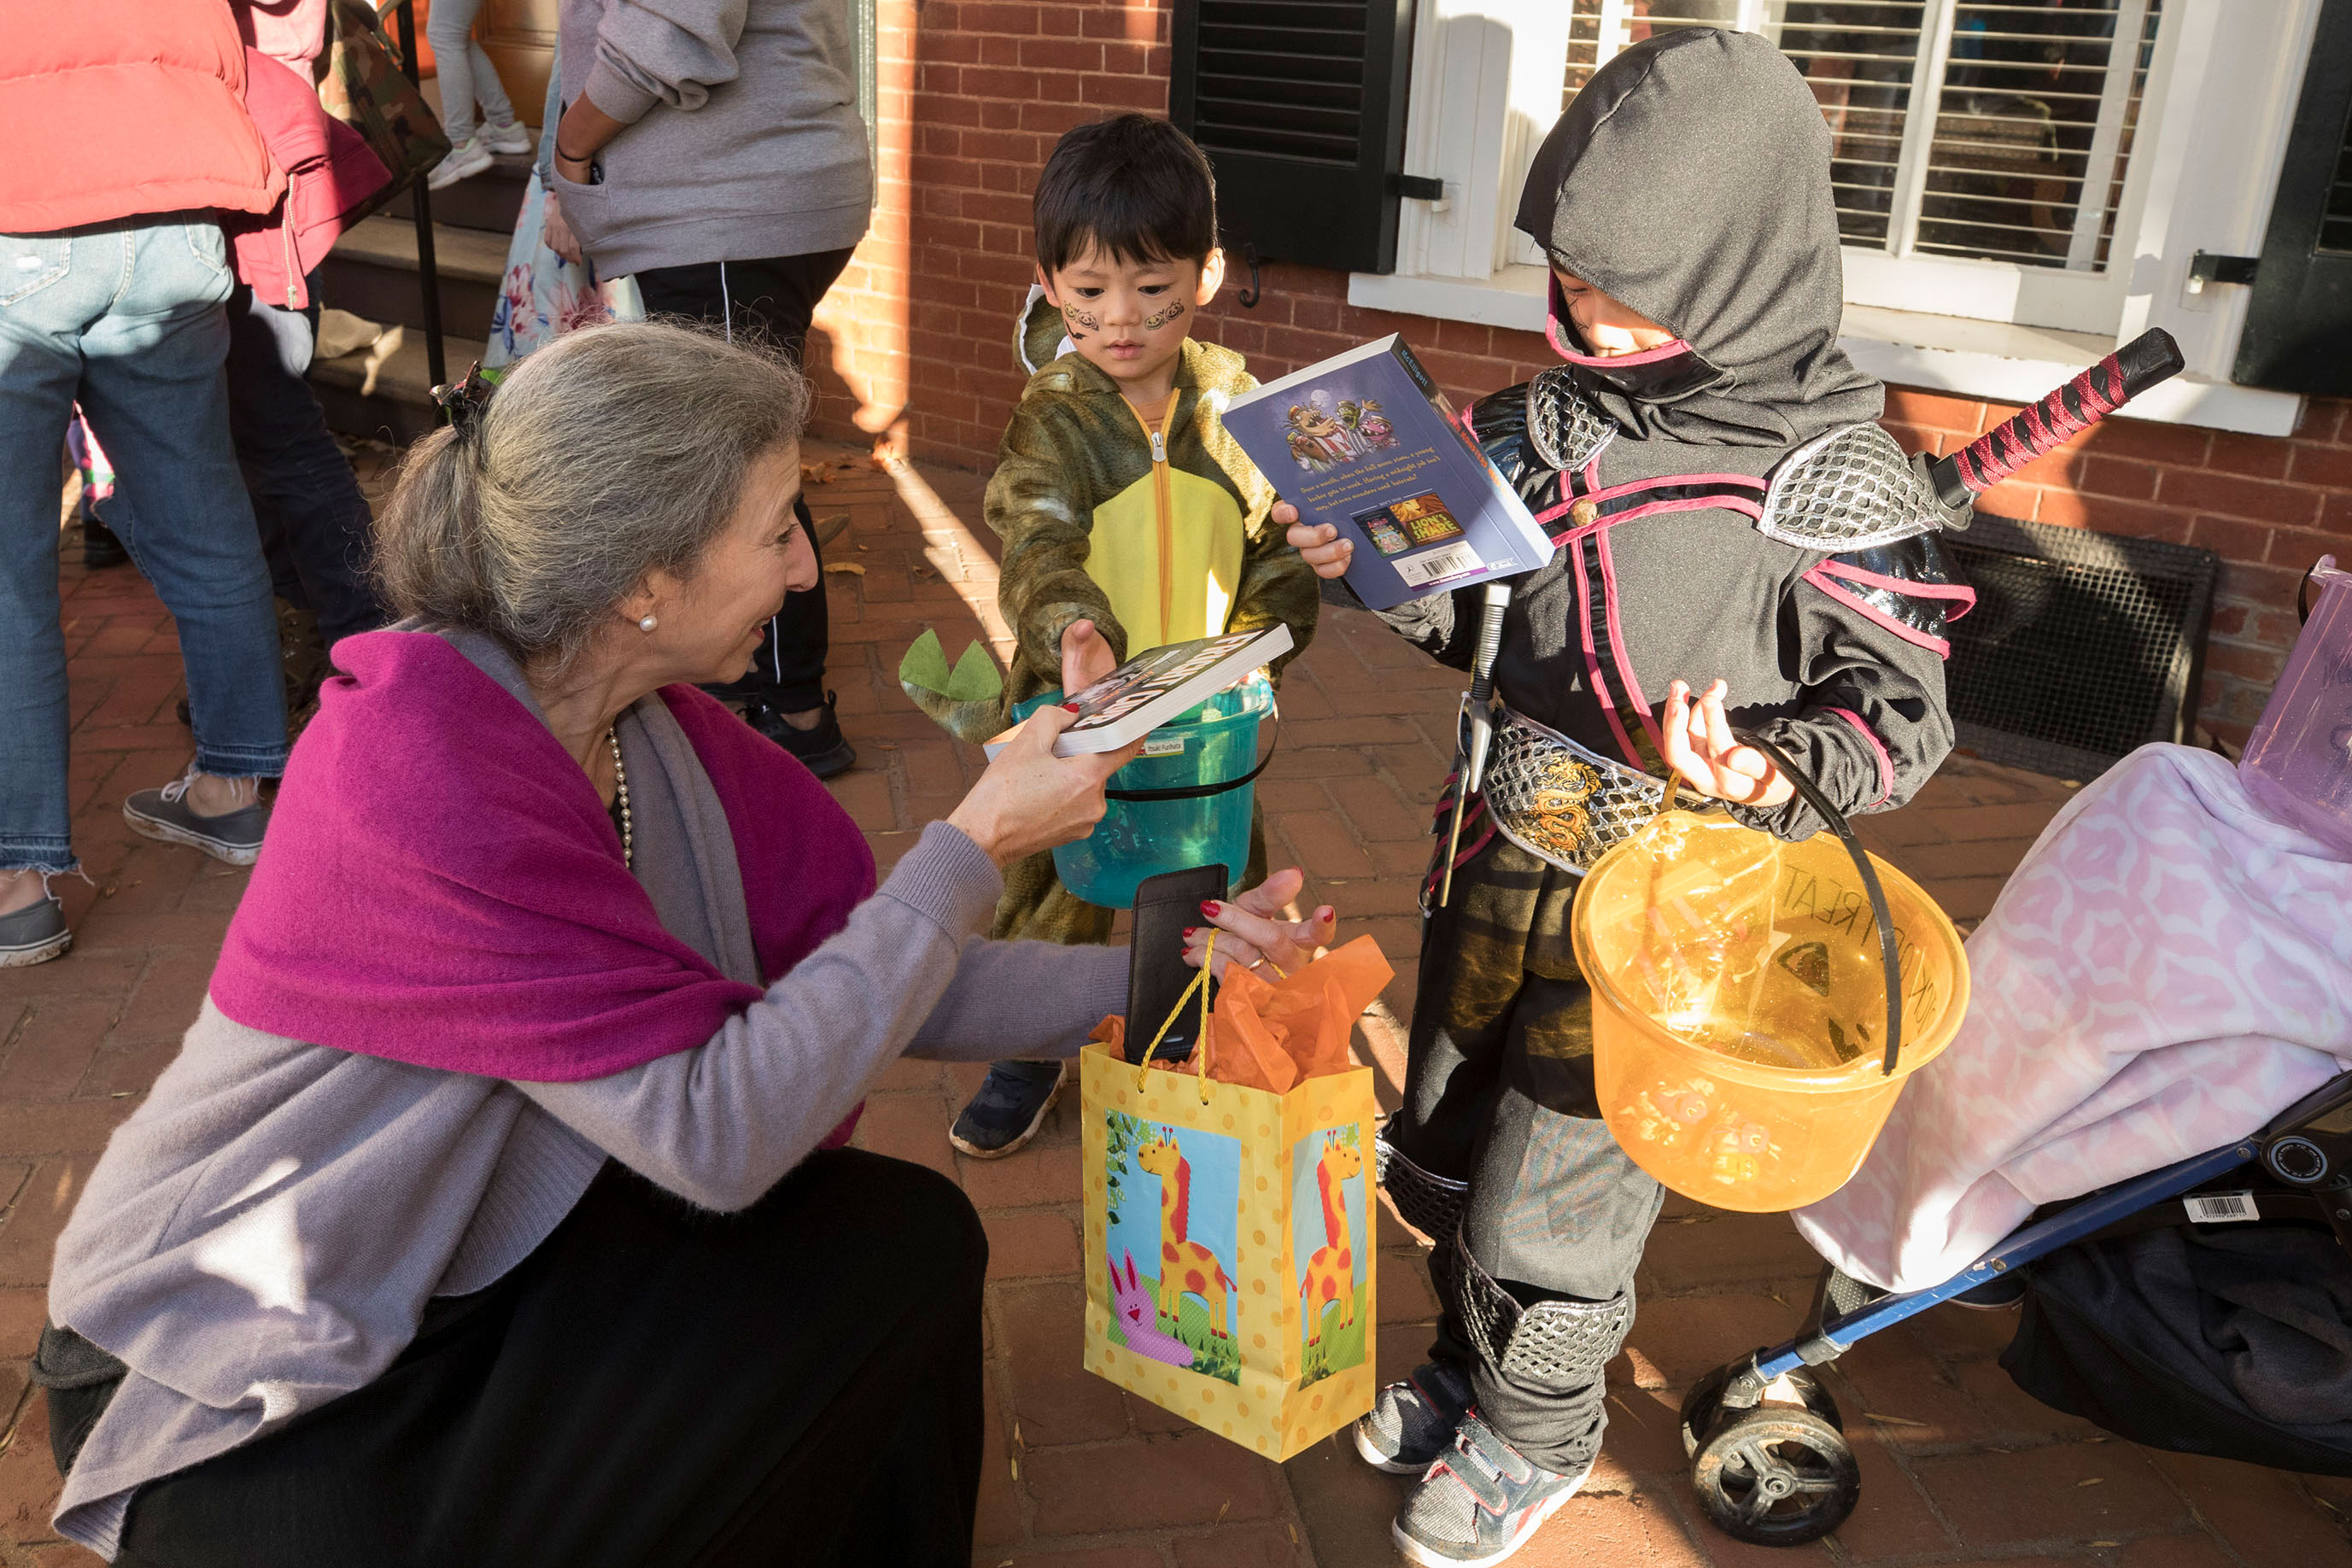 Jeanna Beker hands out free books to trick or treaters